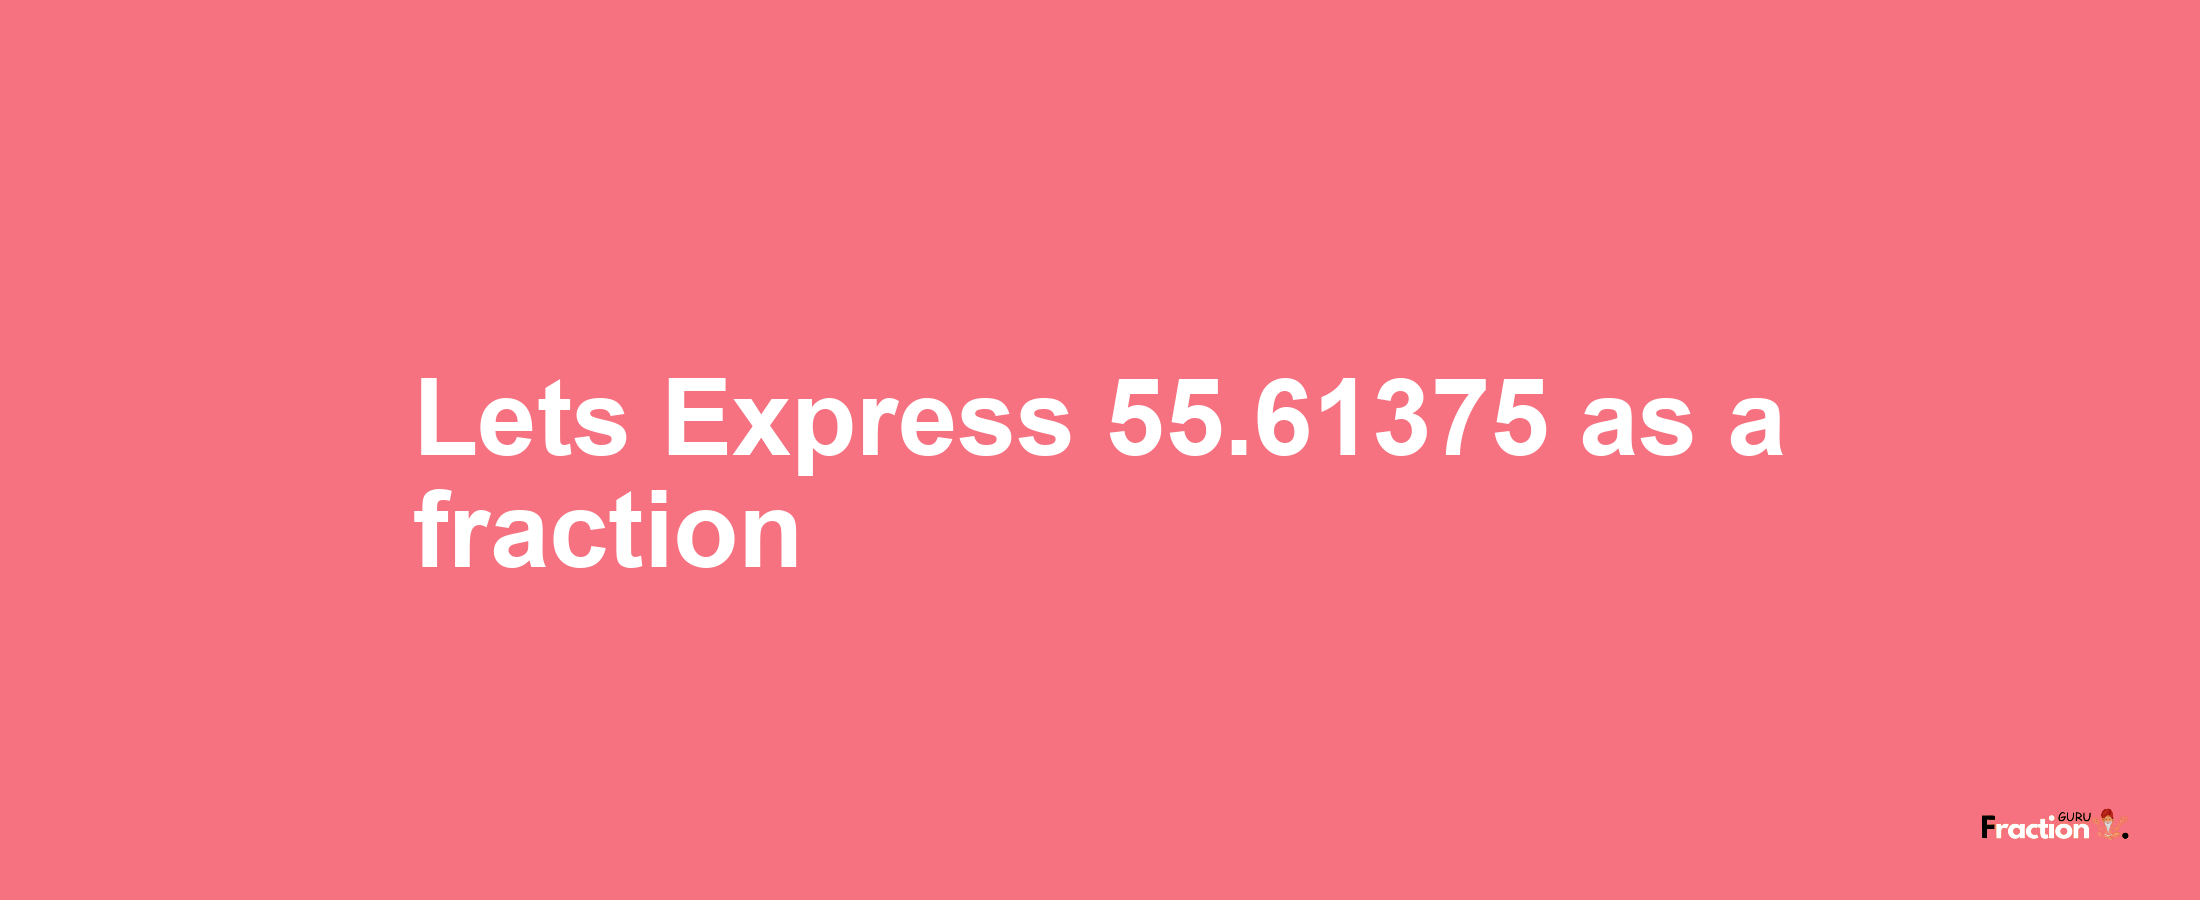 Lets Express 55.61375 as afraction